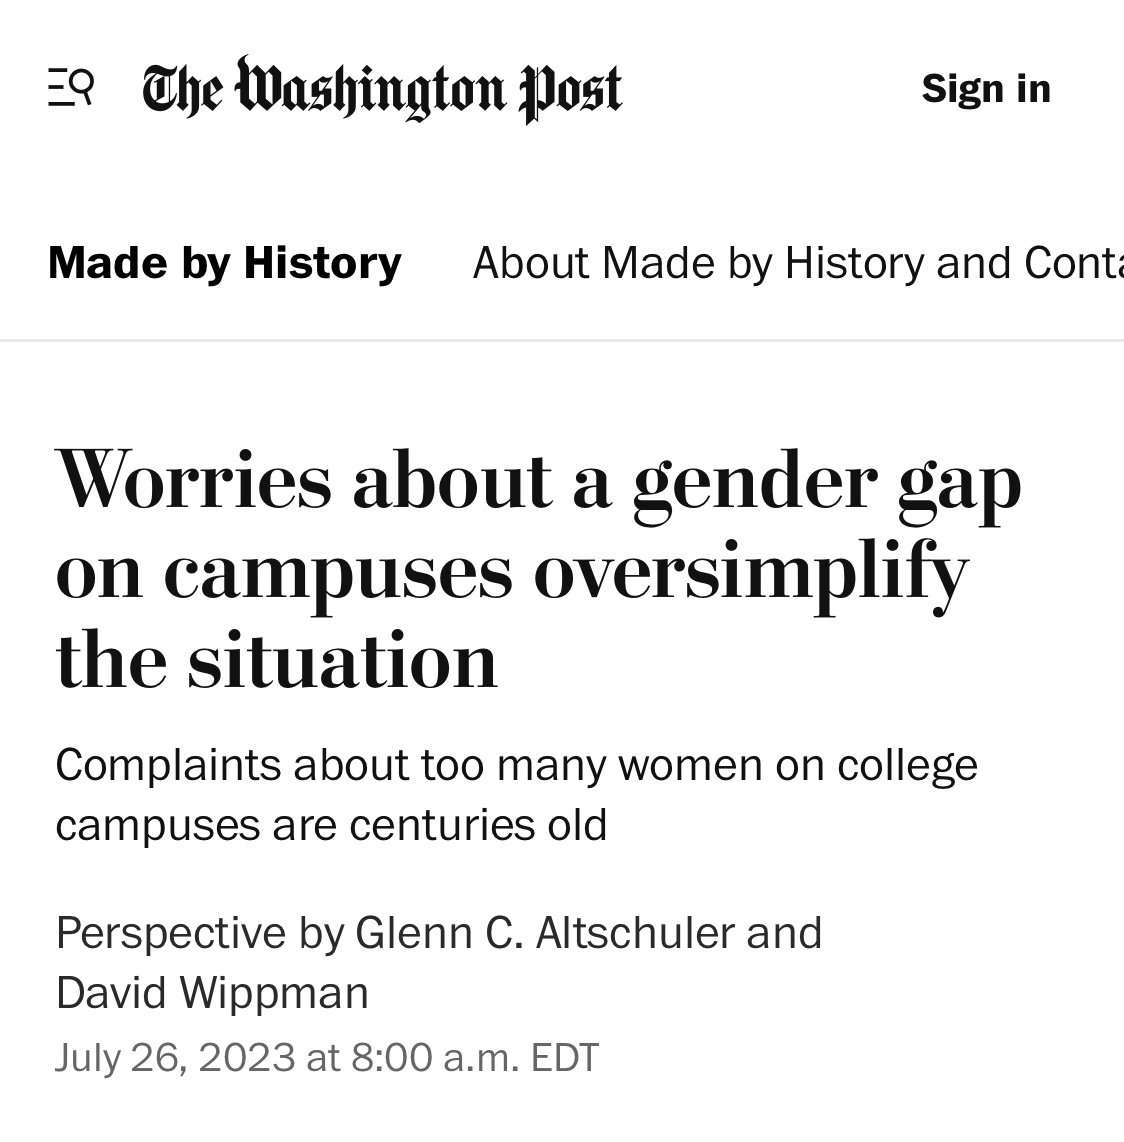 @aimeeterese When Title IX was passed in 1972 to promote gender equality in college there was a 13 point % gap in favor of men getting college degrees. Now there's a 15 point gap favoring women. If you note that institutions now favor women, though, you'll be dismissed and attacked as sexist.